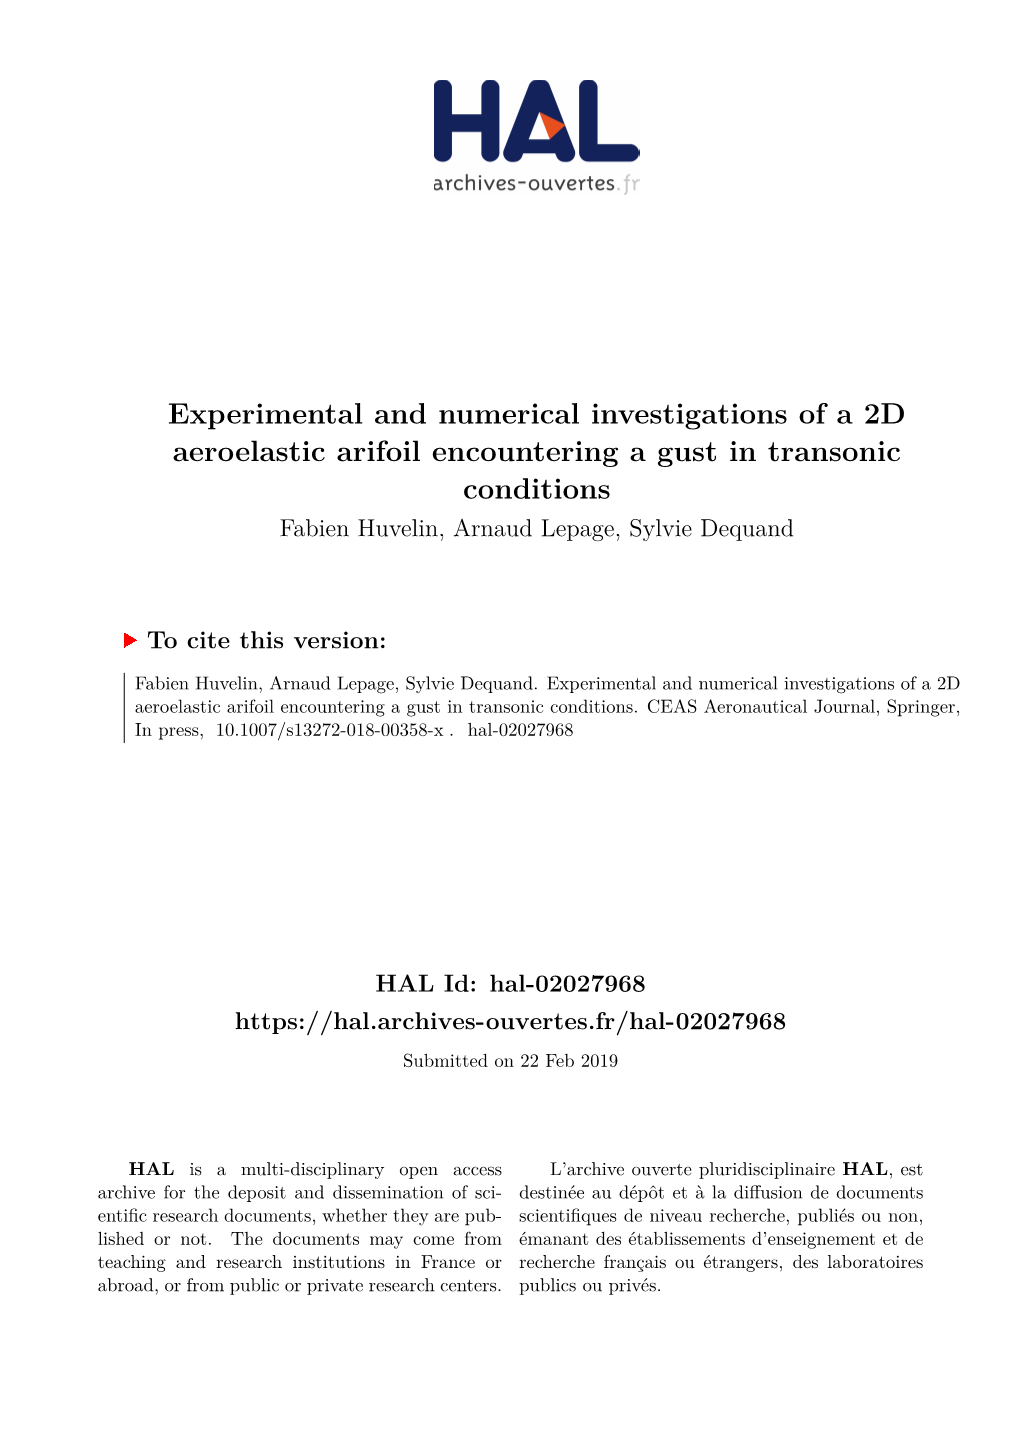 Experimental and Numerical Investigations of a 2D Aeroelastic Arifoil Encountering a Gust in Transonic Conditions Fabien Huvelin, Arnaud Lepage, Sylvie Dequand